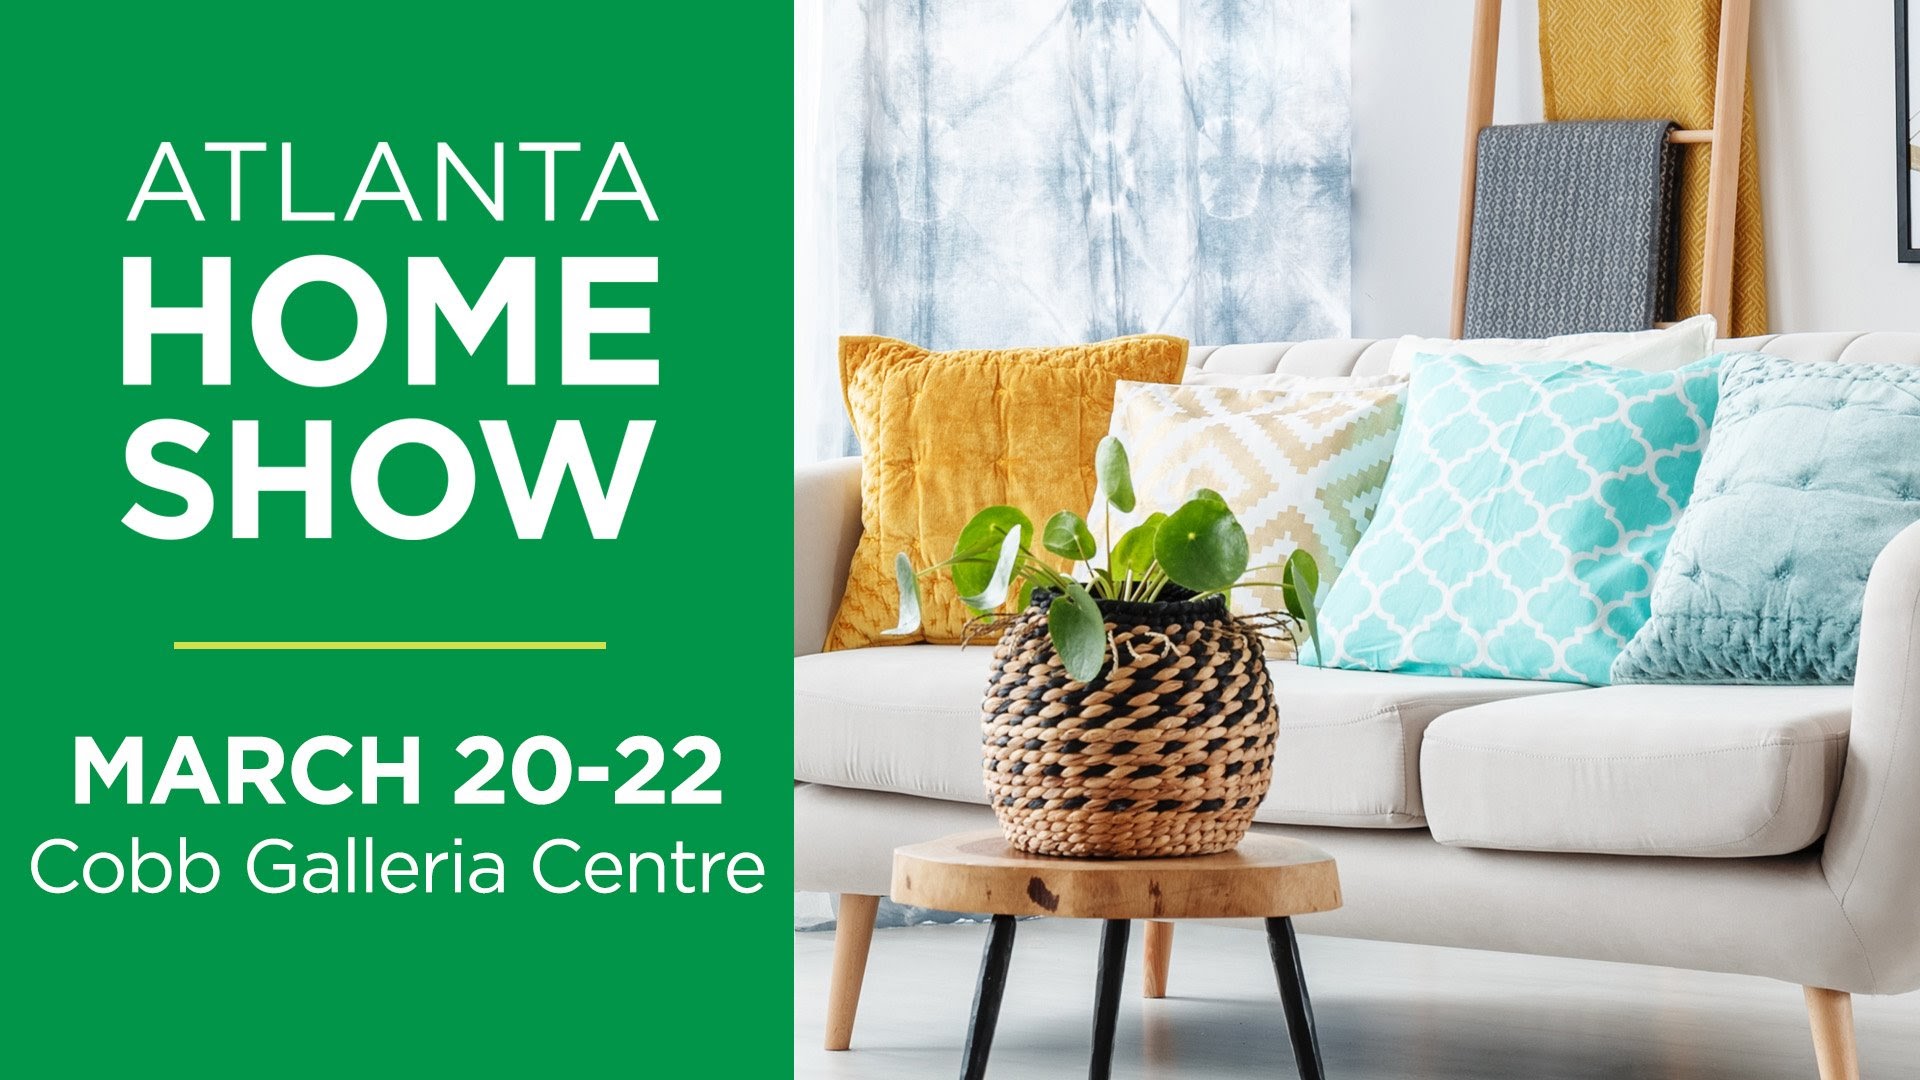 ***Facebook Friday Freebie*** Win 4 tickets to The Atlanta Home Show